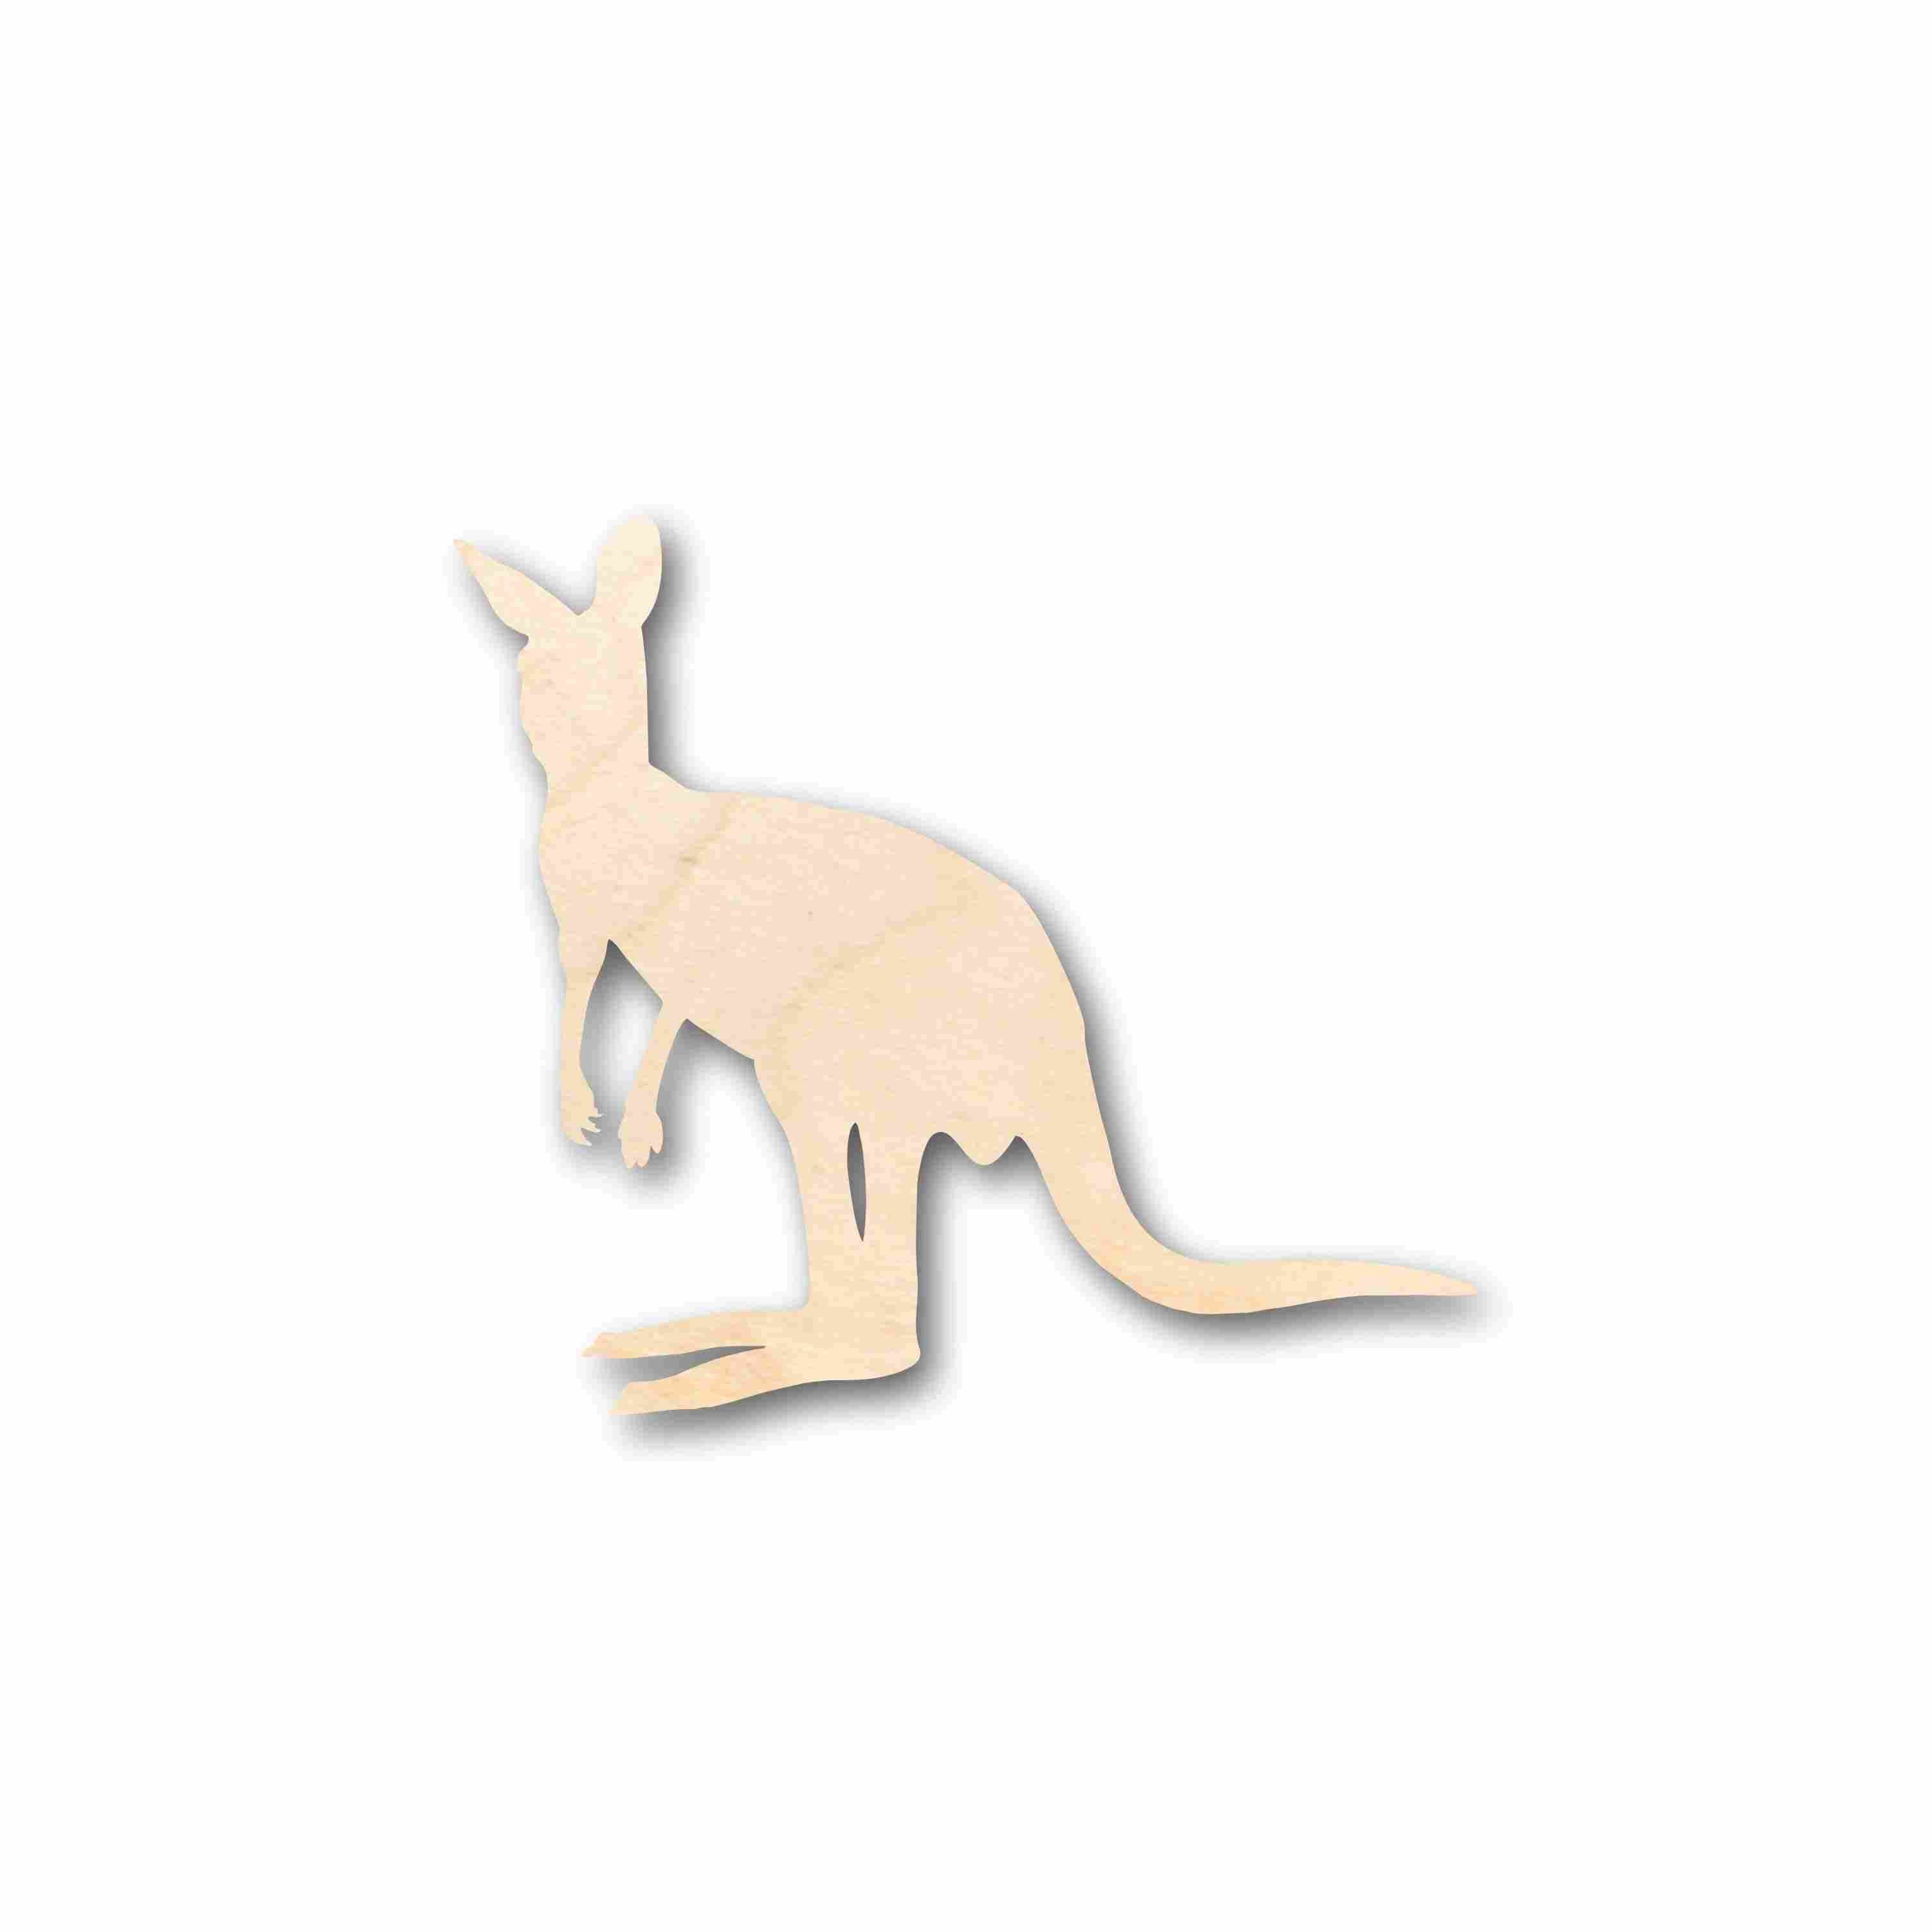 Unfinished Wood Kangaroo Silhouette - Craft- up to 24